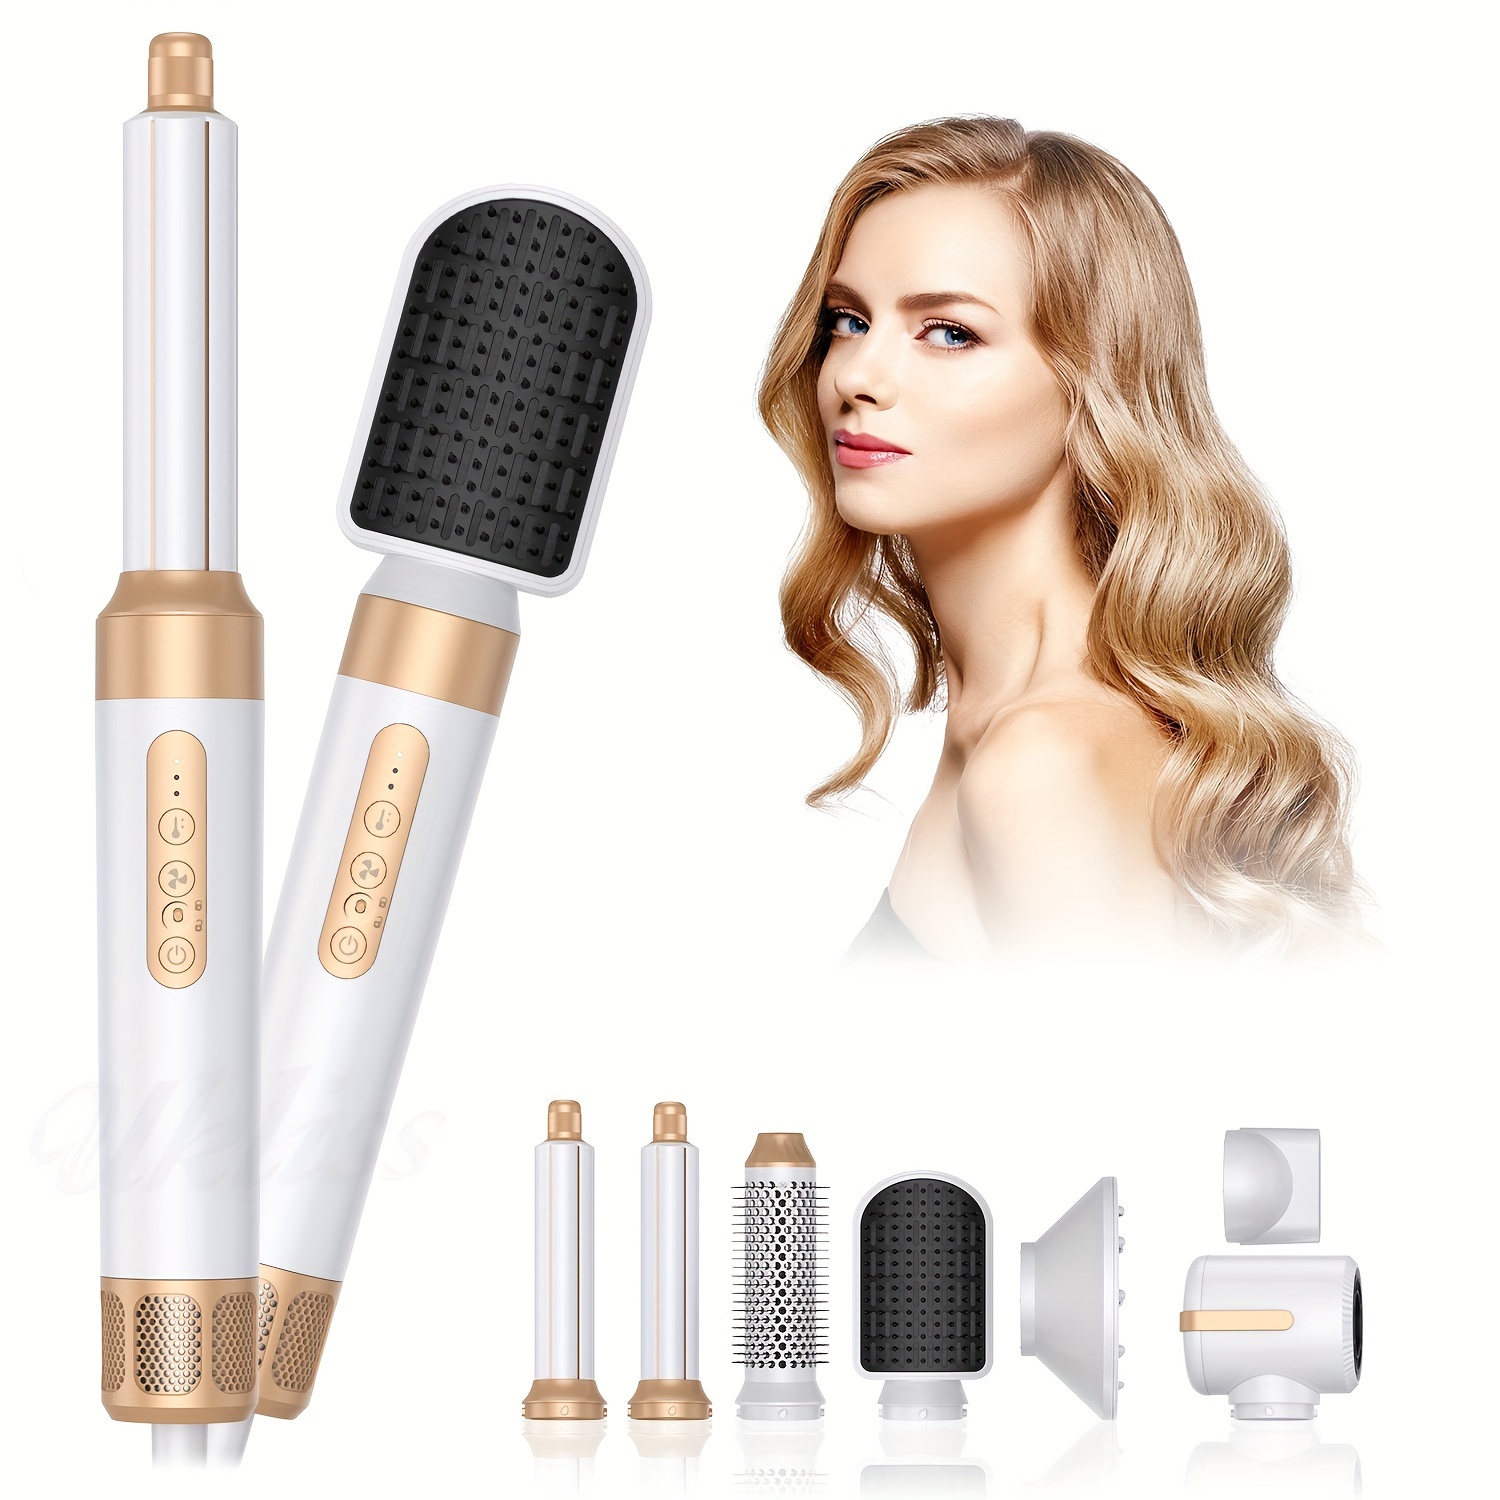 

7-in-1 Hair Styler And Dryer Set, Brushless High-speed Motor, Interchangeable Brushes & Air Curler Wand, Hot Air Volumizer & Straightener, Thermal Round Brush